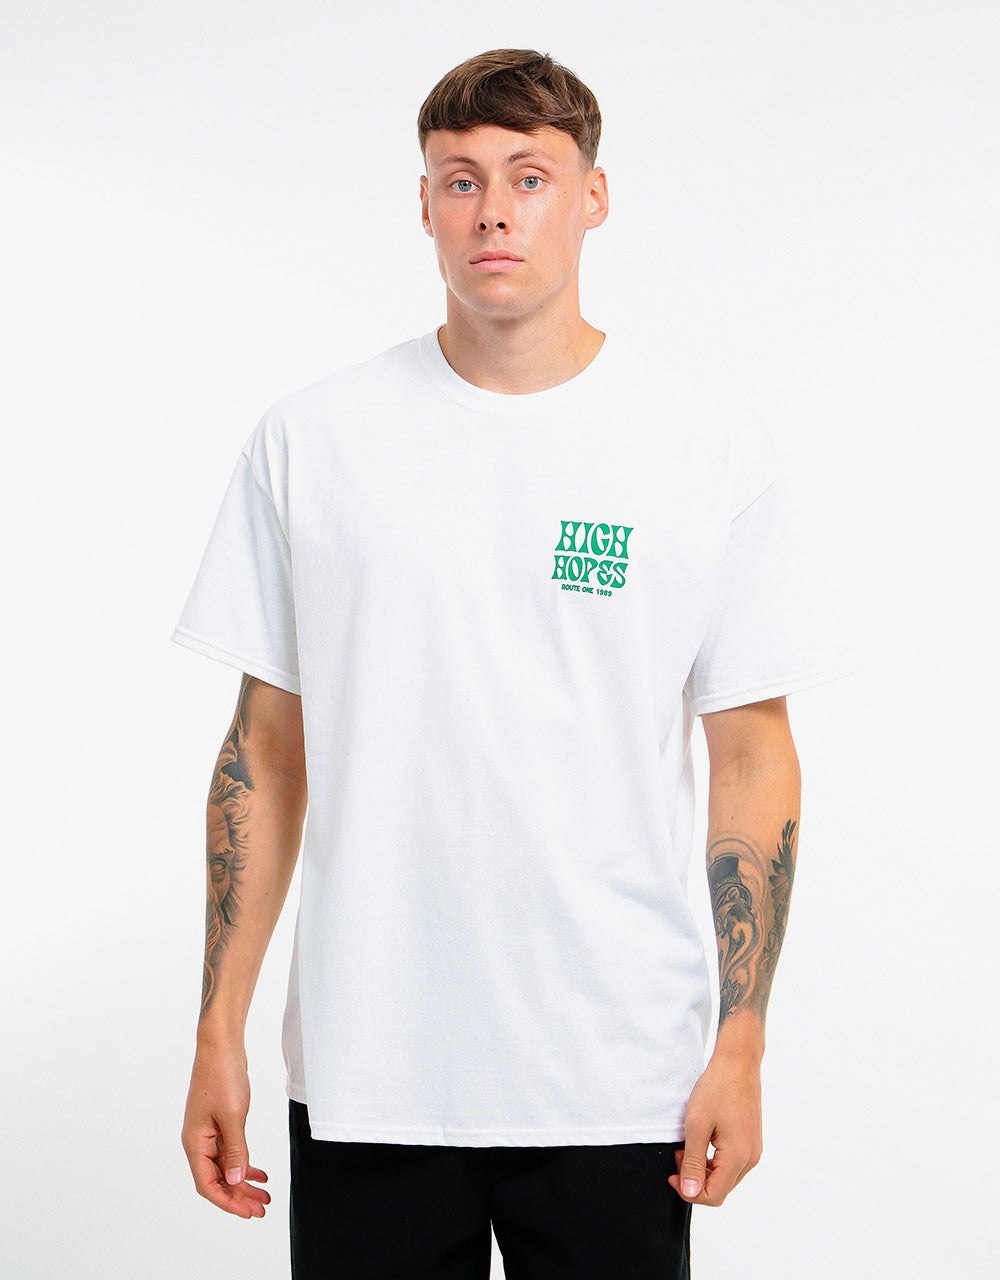 Route One High Hopes T-Shirt - White